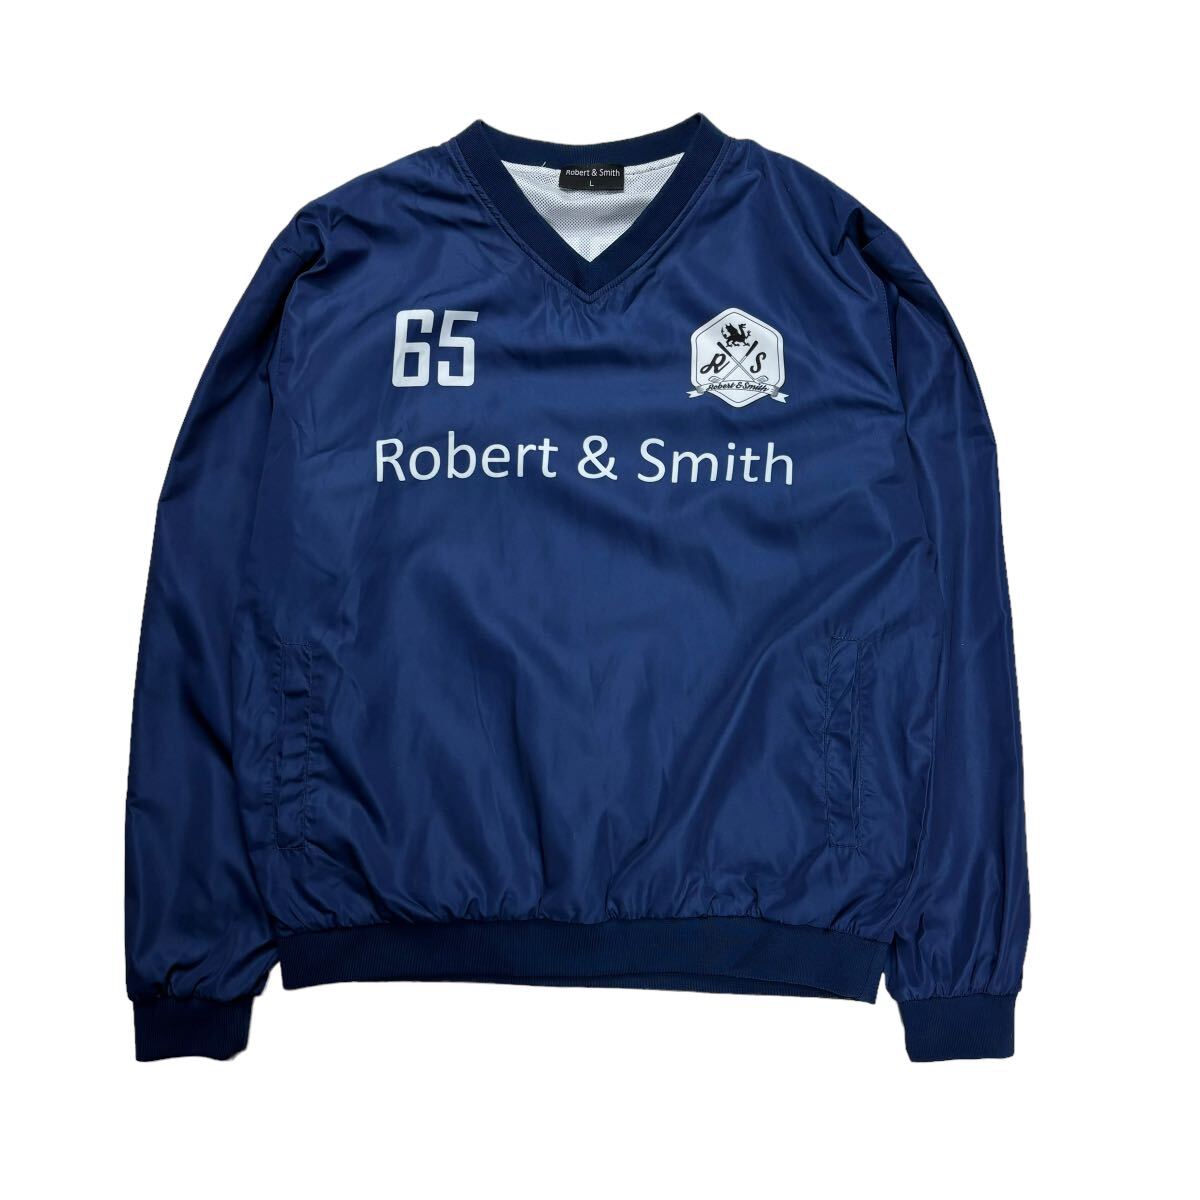 Robert & Smith Robert and Smith pi stereo Wind breaker pull over Golf Golf wear navy men's L size reverse side mesh 